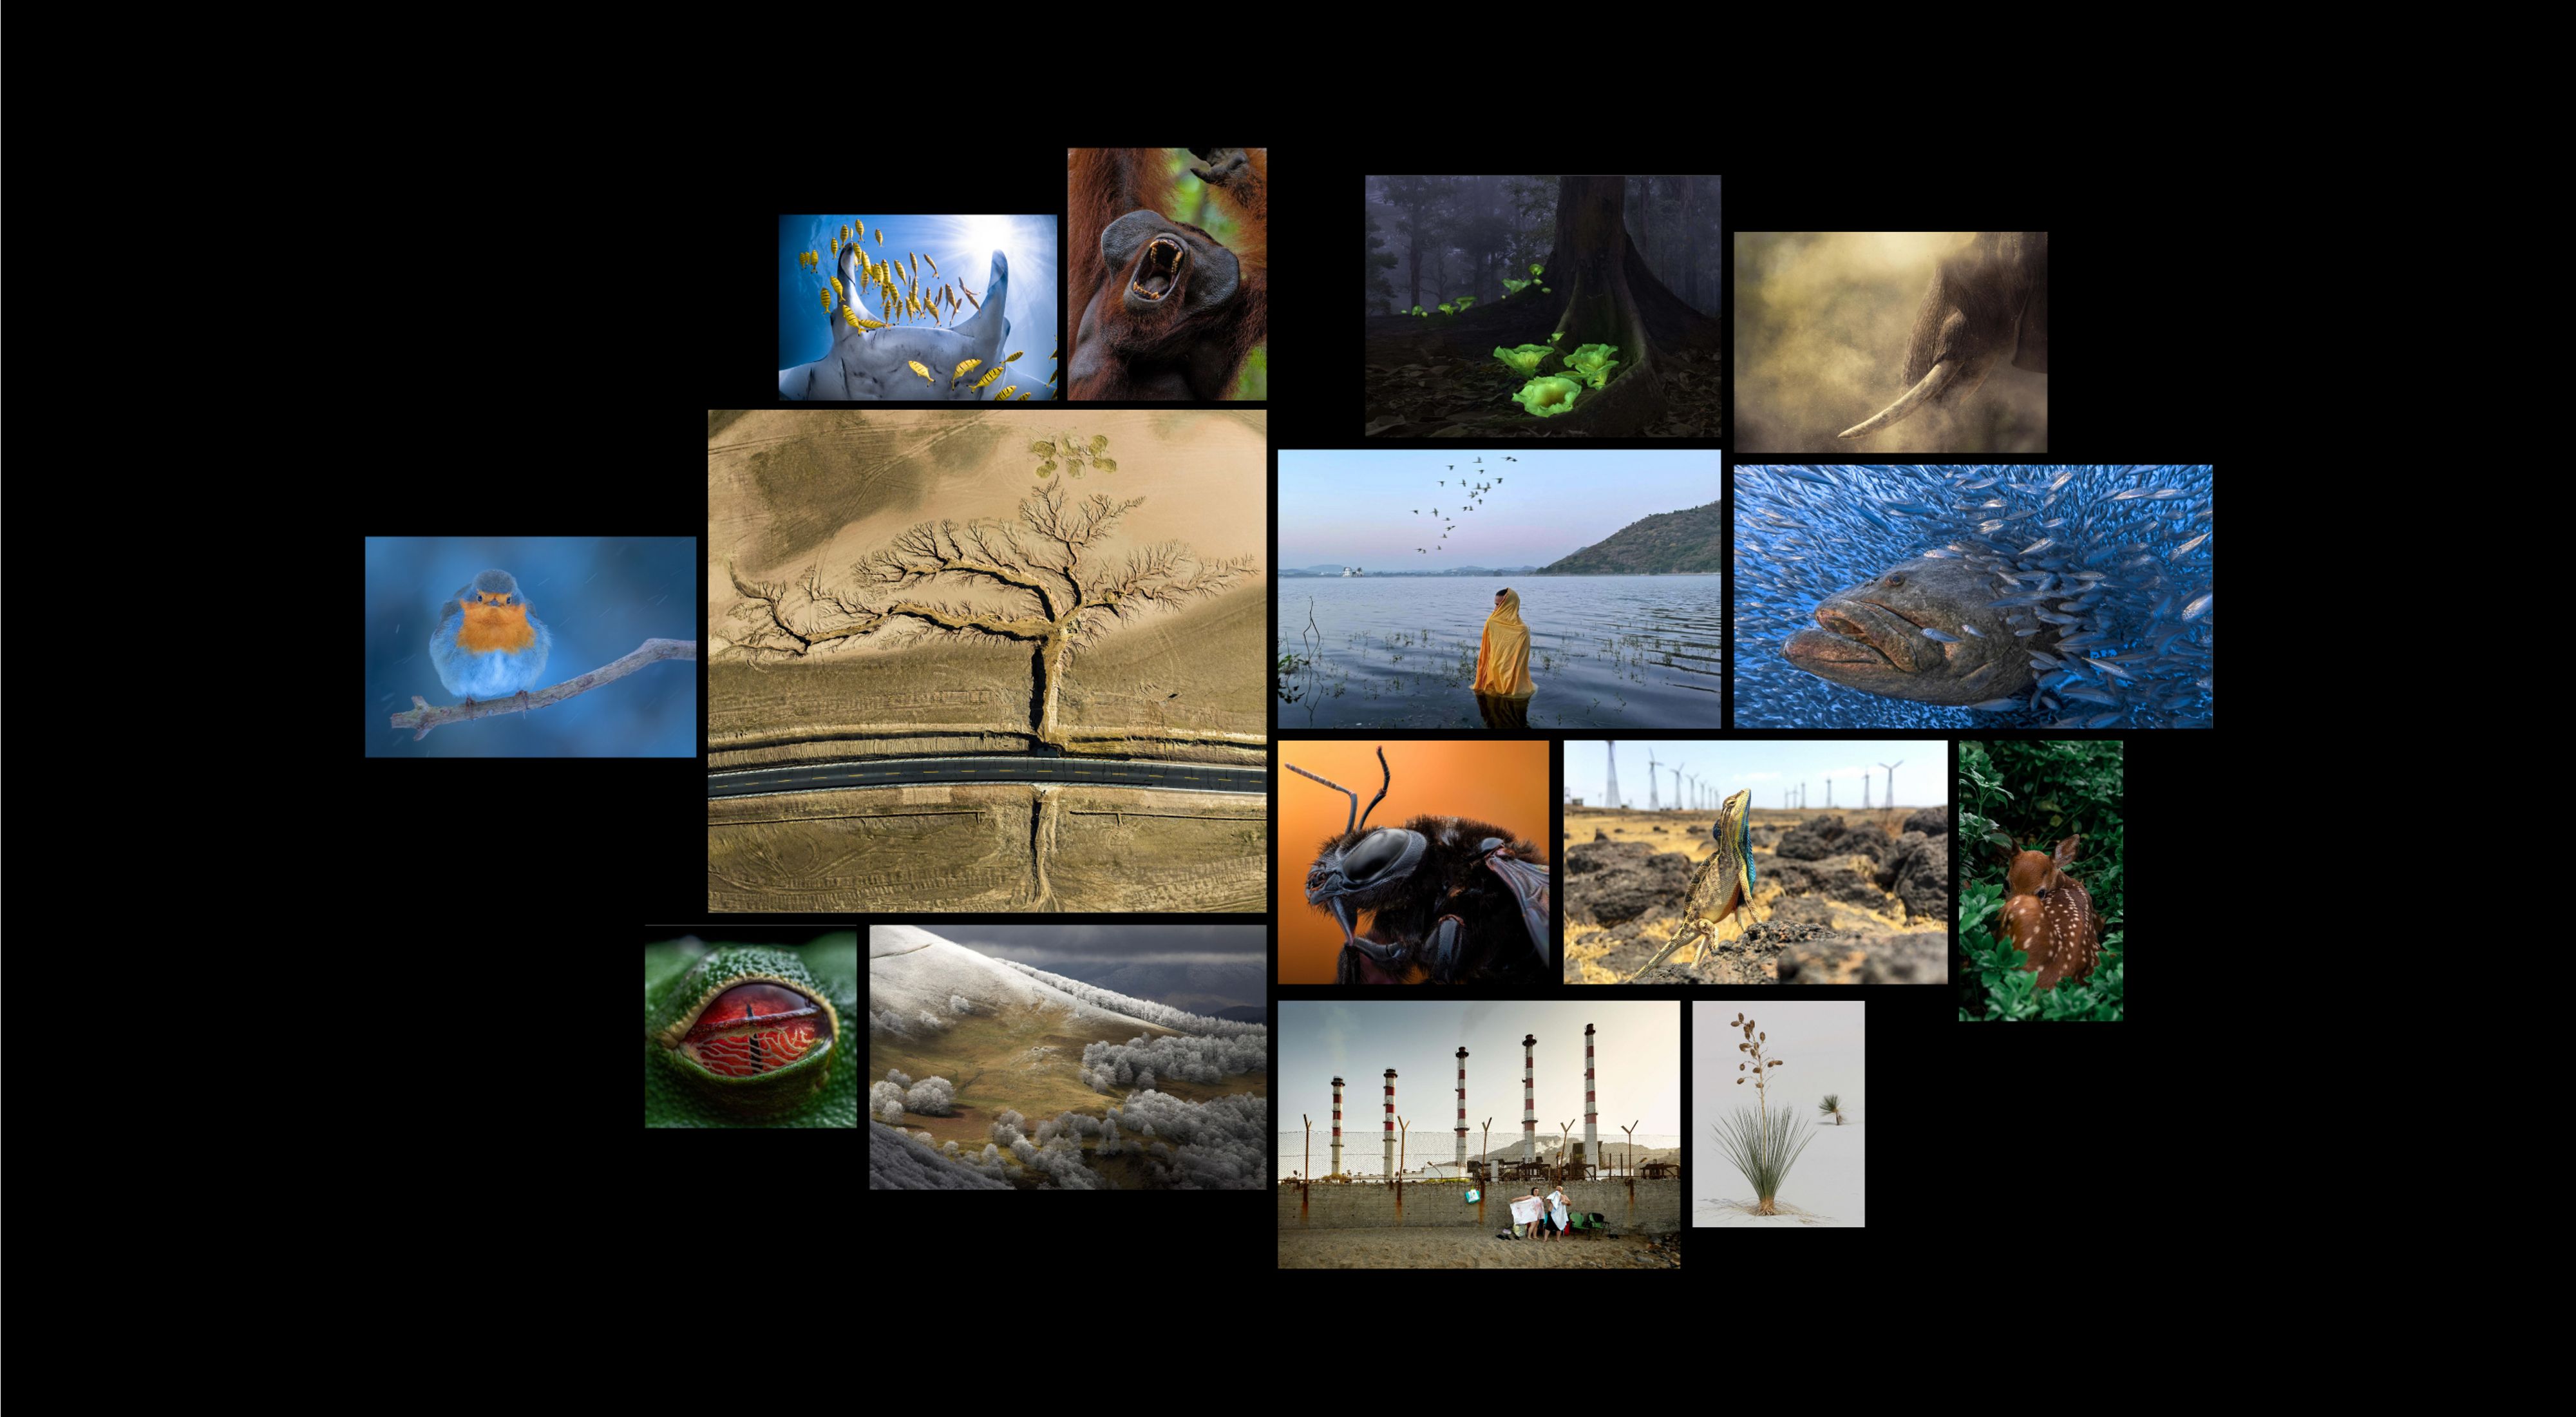 Collage of winning images from the 2022 Global Photo Contest.